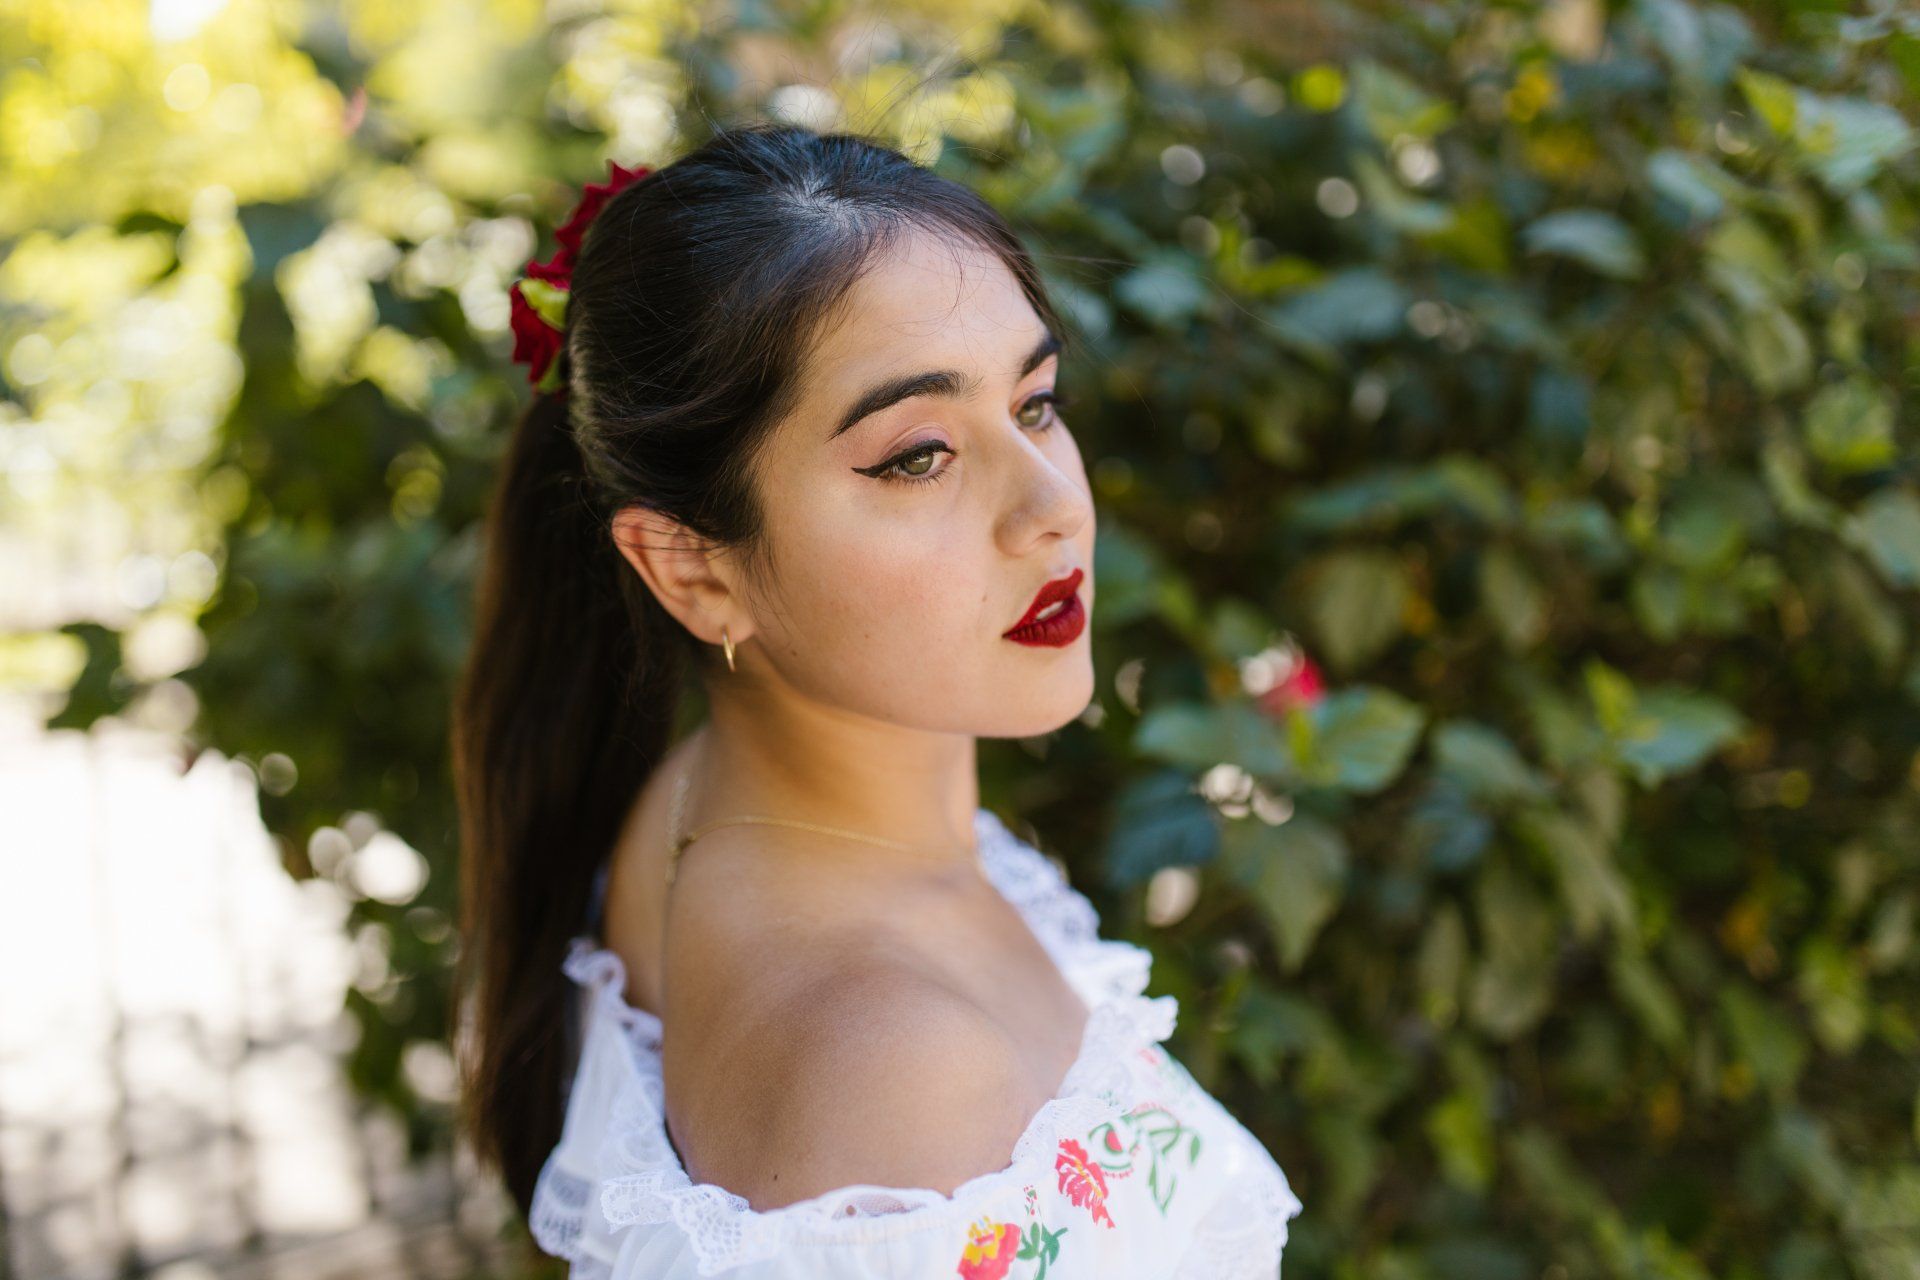 A side view of a beautiful  young Mexican woman in a white off-the-shoulder dress